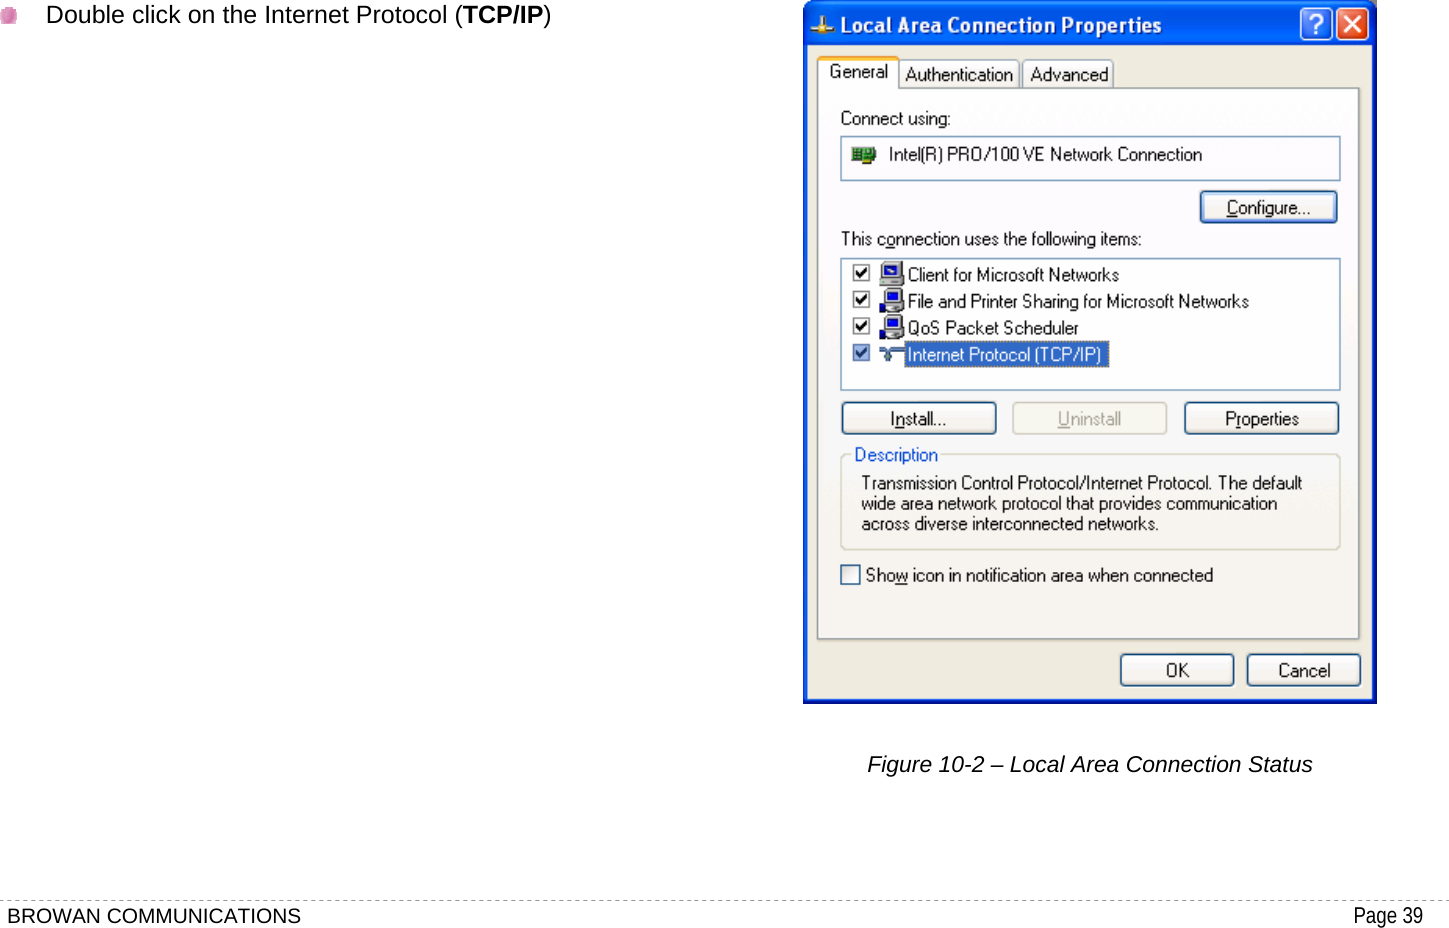 BROWAN COMMUNICATIONS                                                                                           Page 39    Double click on the Internet Protocol (TCP/IP)                         Figure 10-2 – Local Area Connection Status  